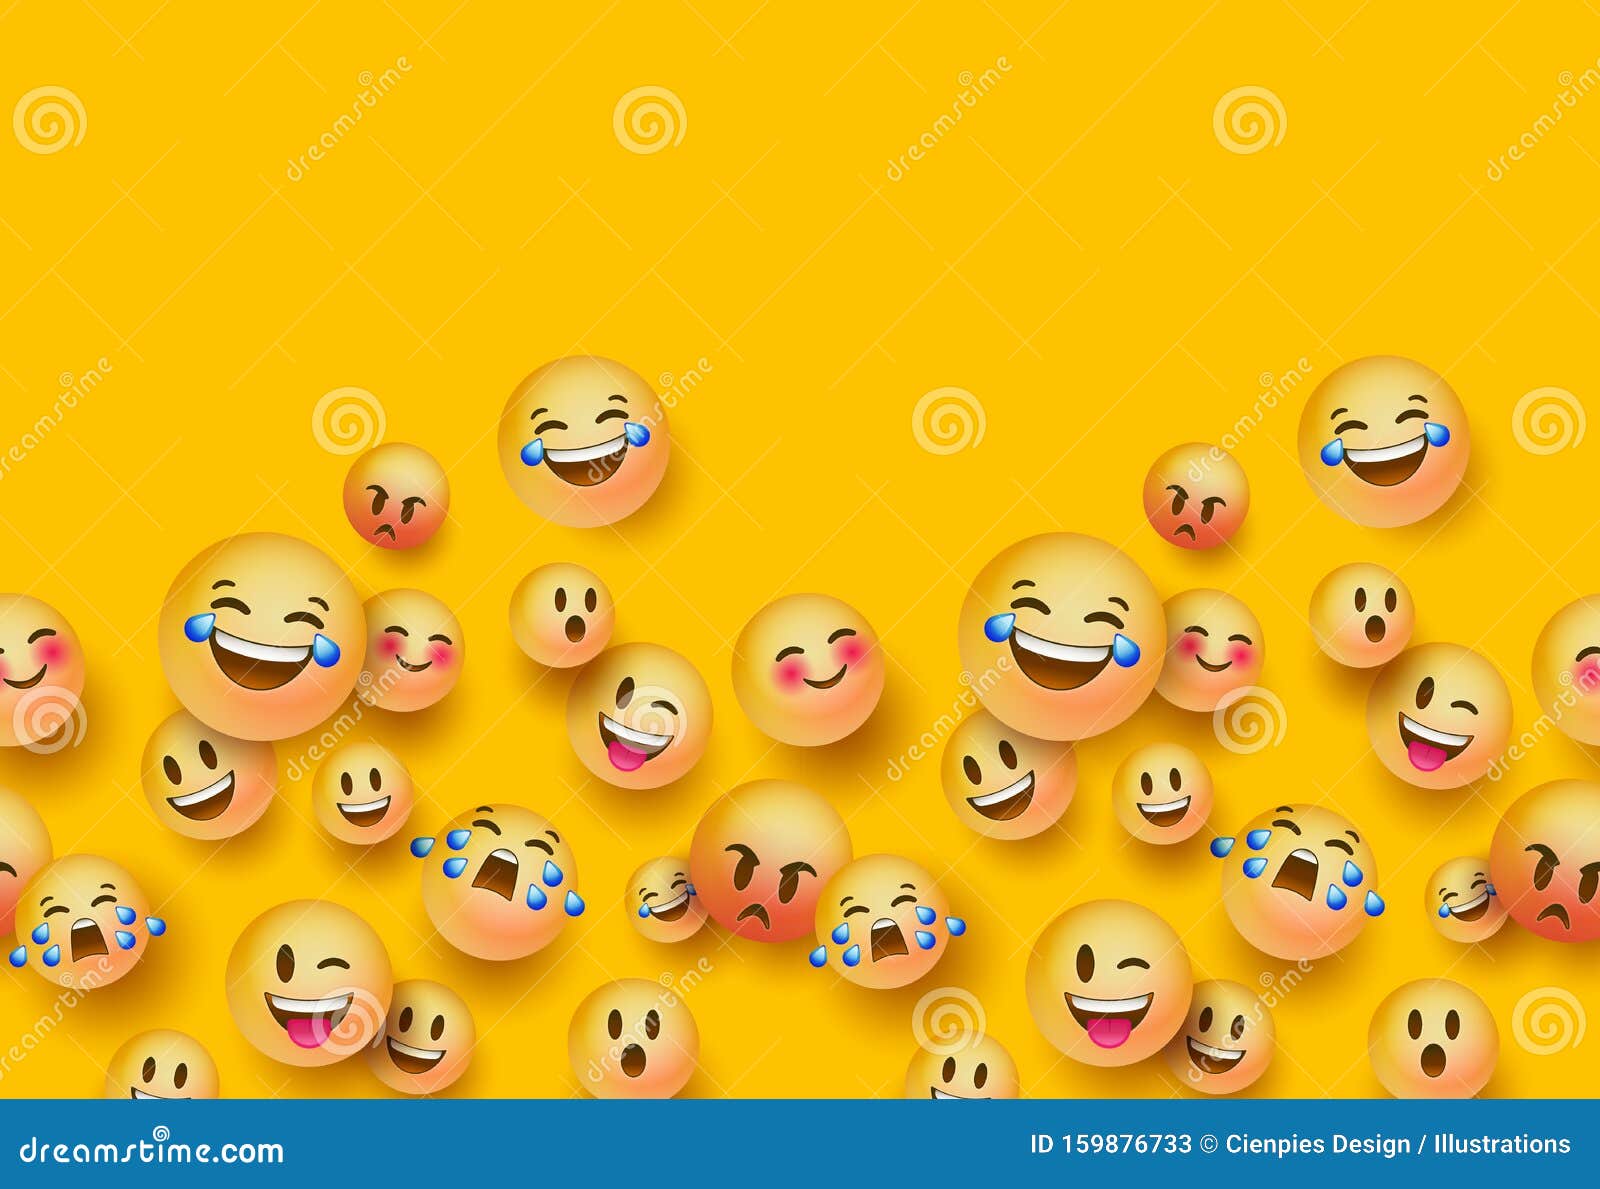 3D Fun Emoji Icon Seamless Pattern Background Stock Vector - Illustration  of isolated, emoticon: 159876733